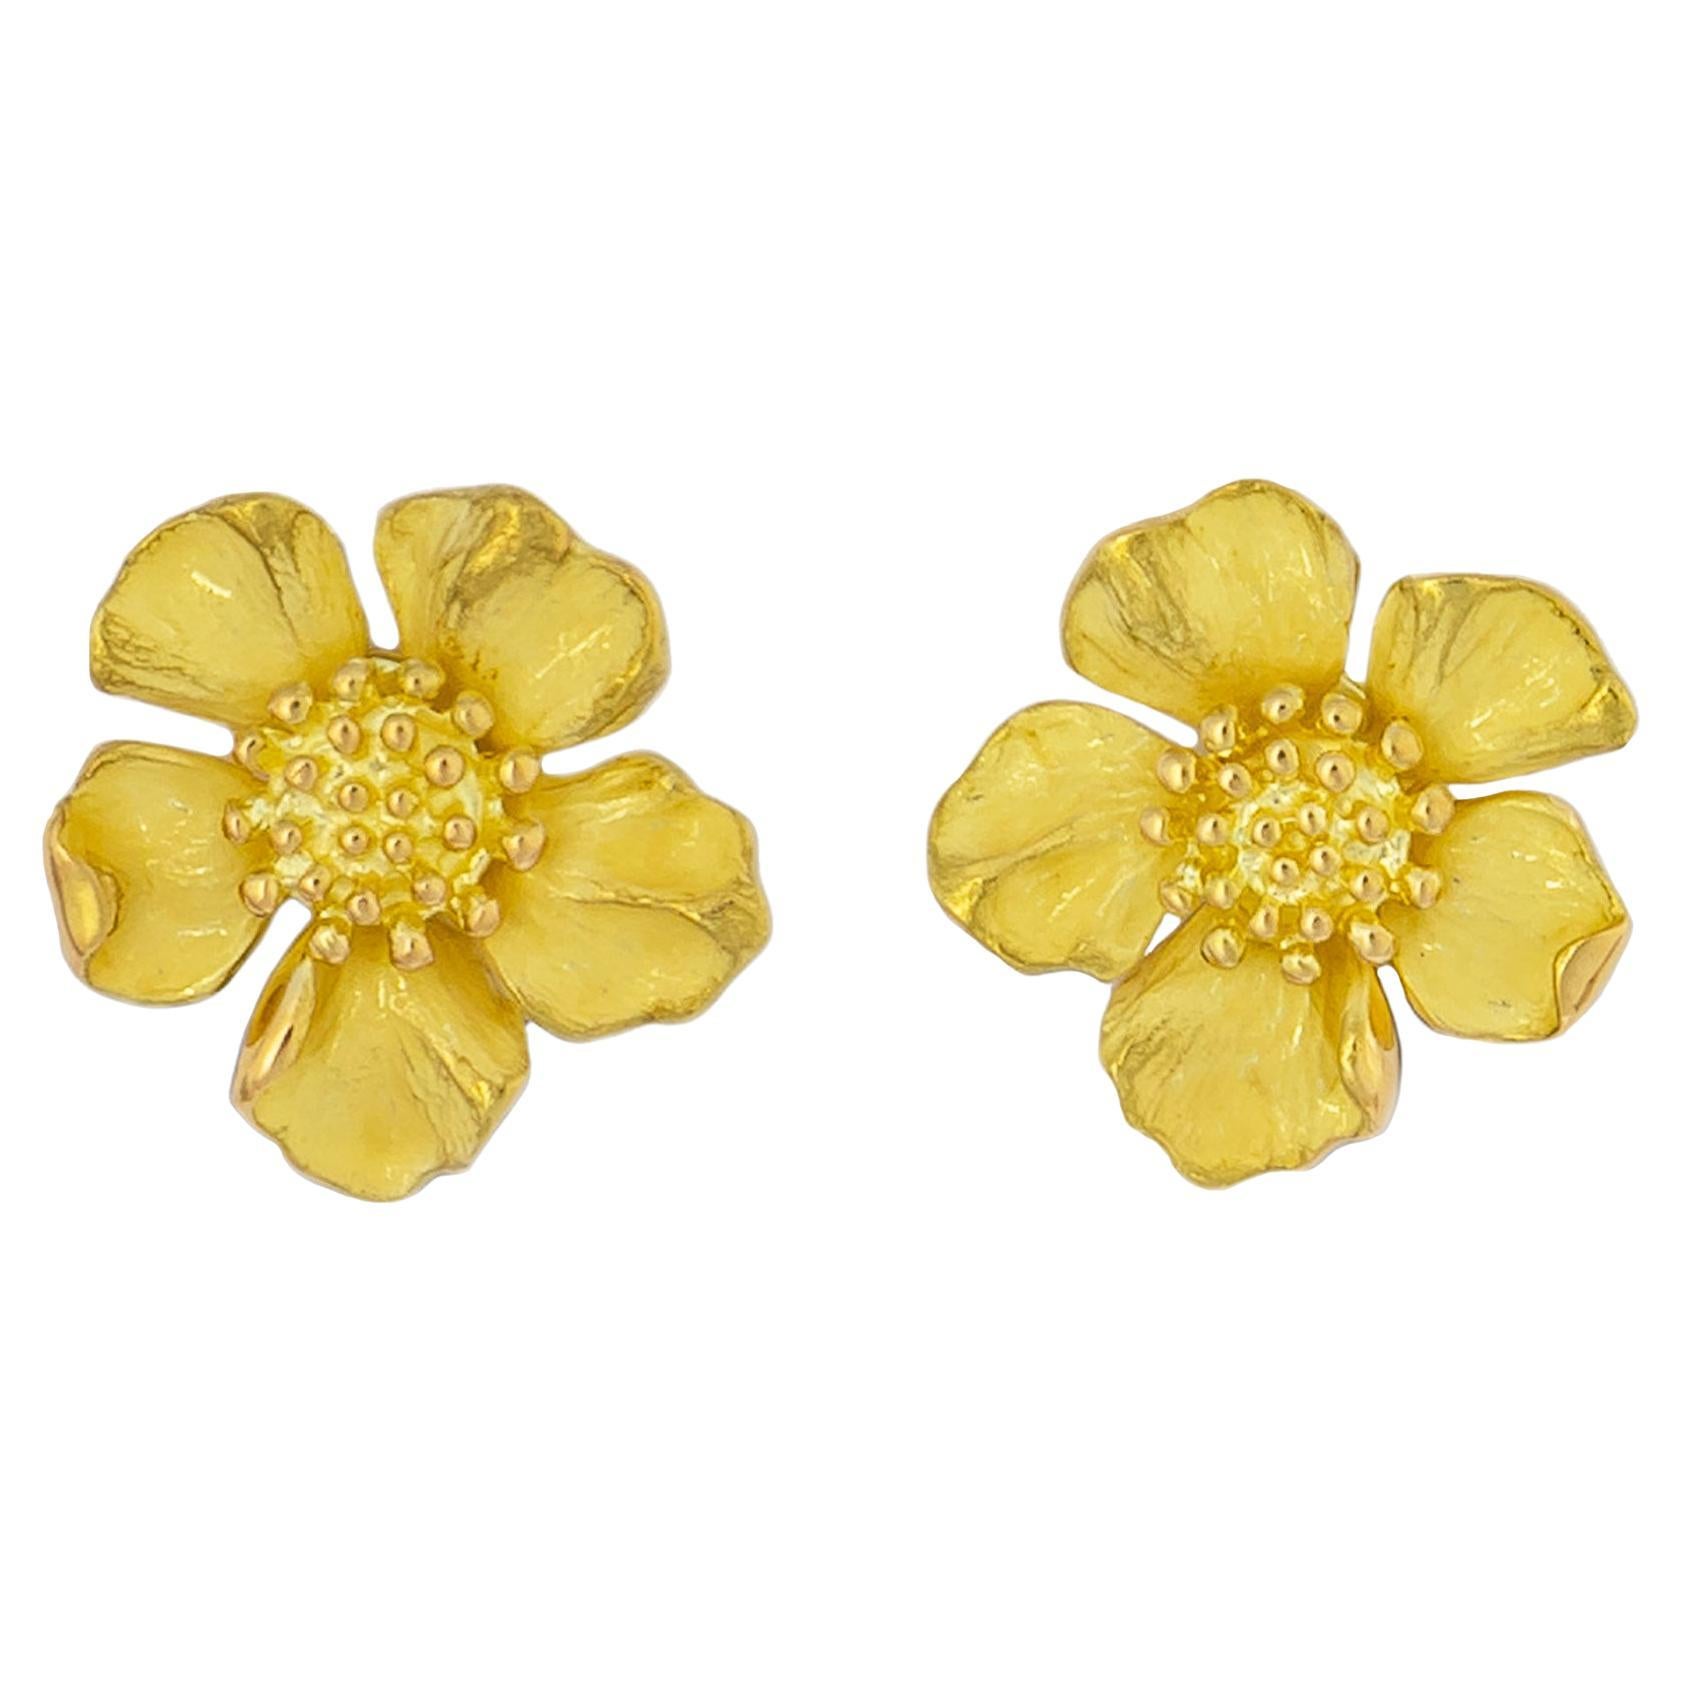 Tiffany and Co. Diamond Gold Flower Earrings at 1stDibs